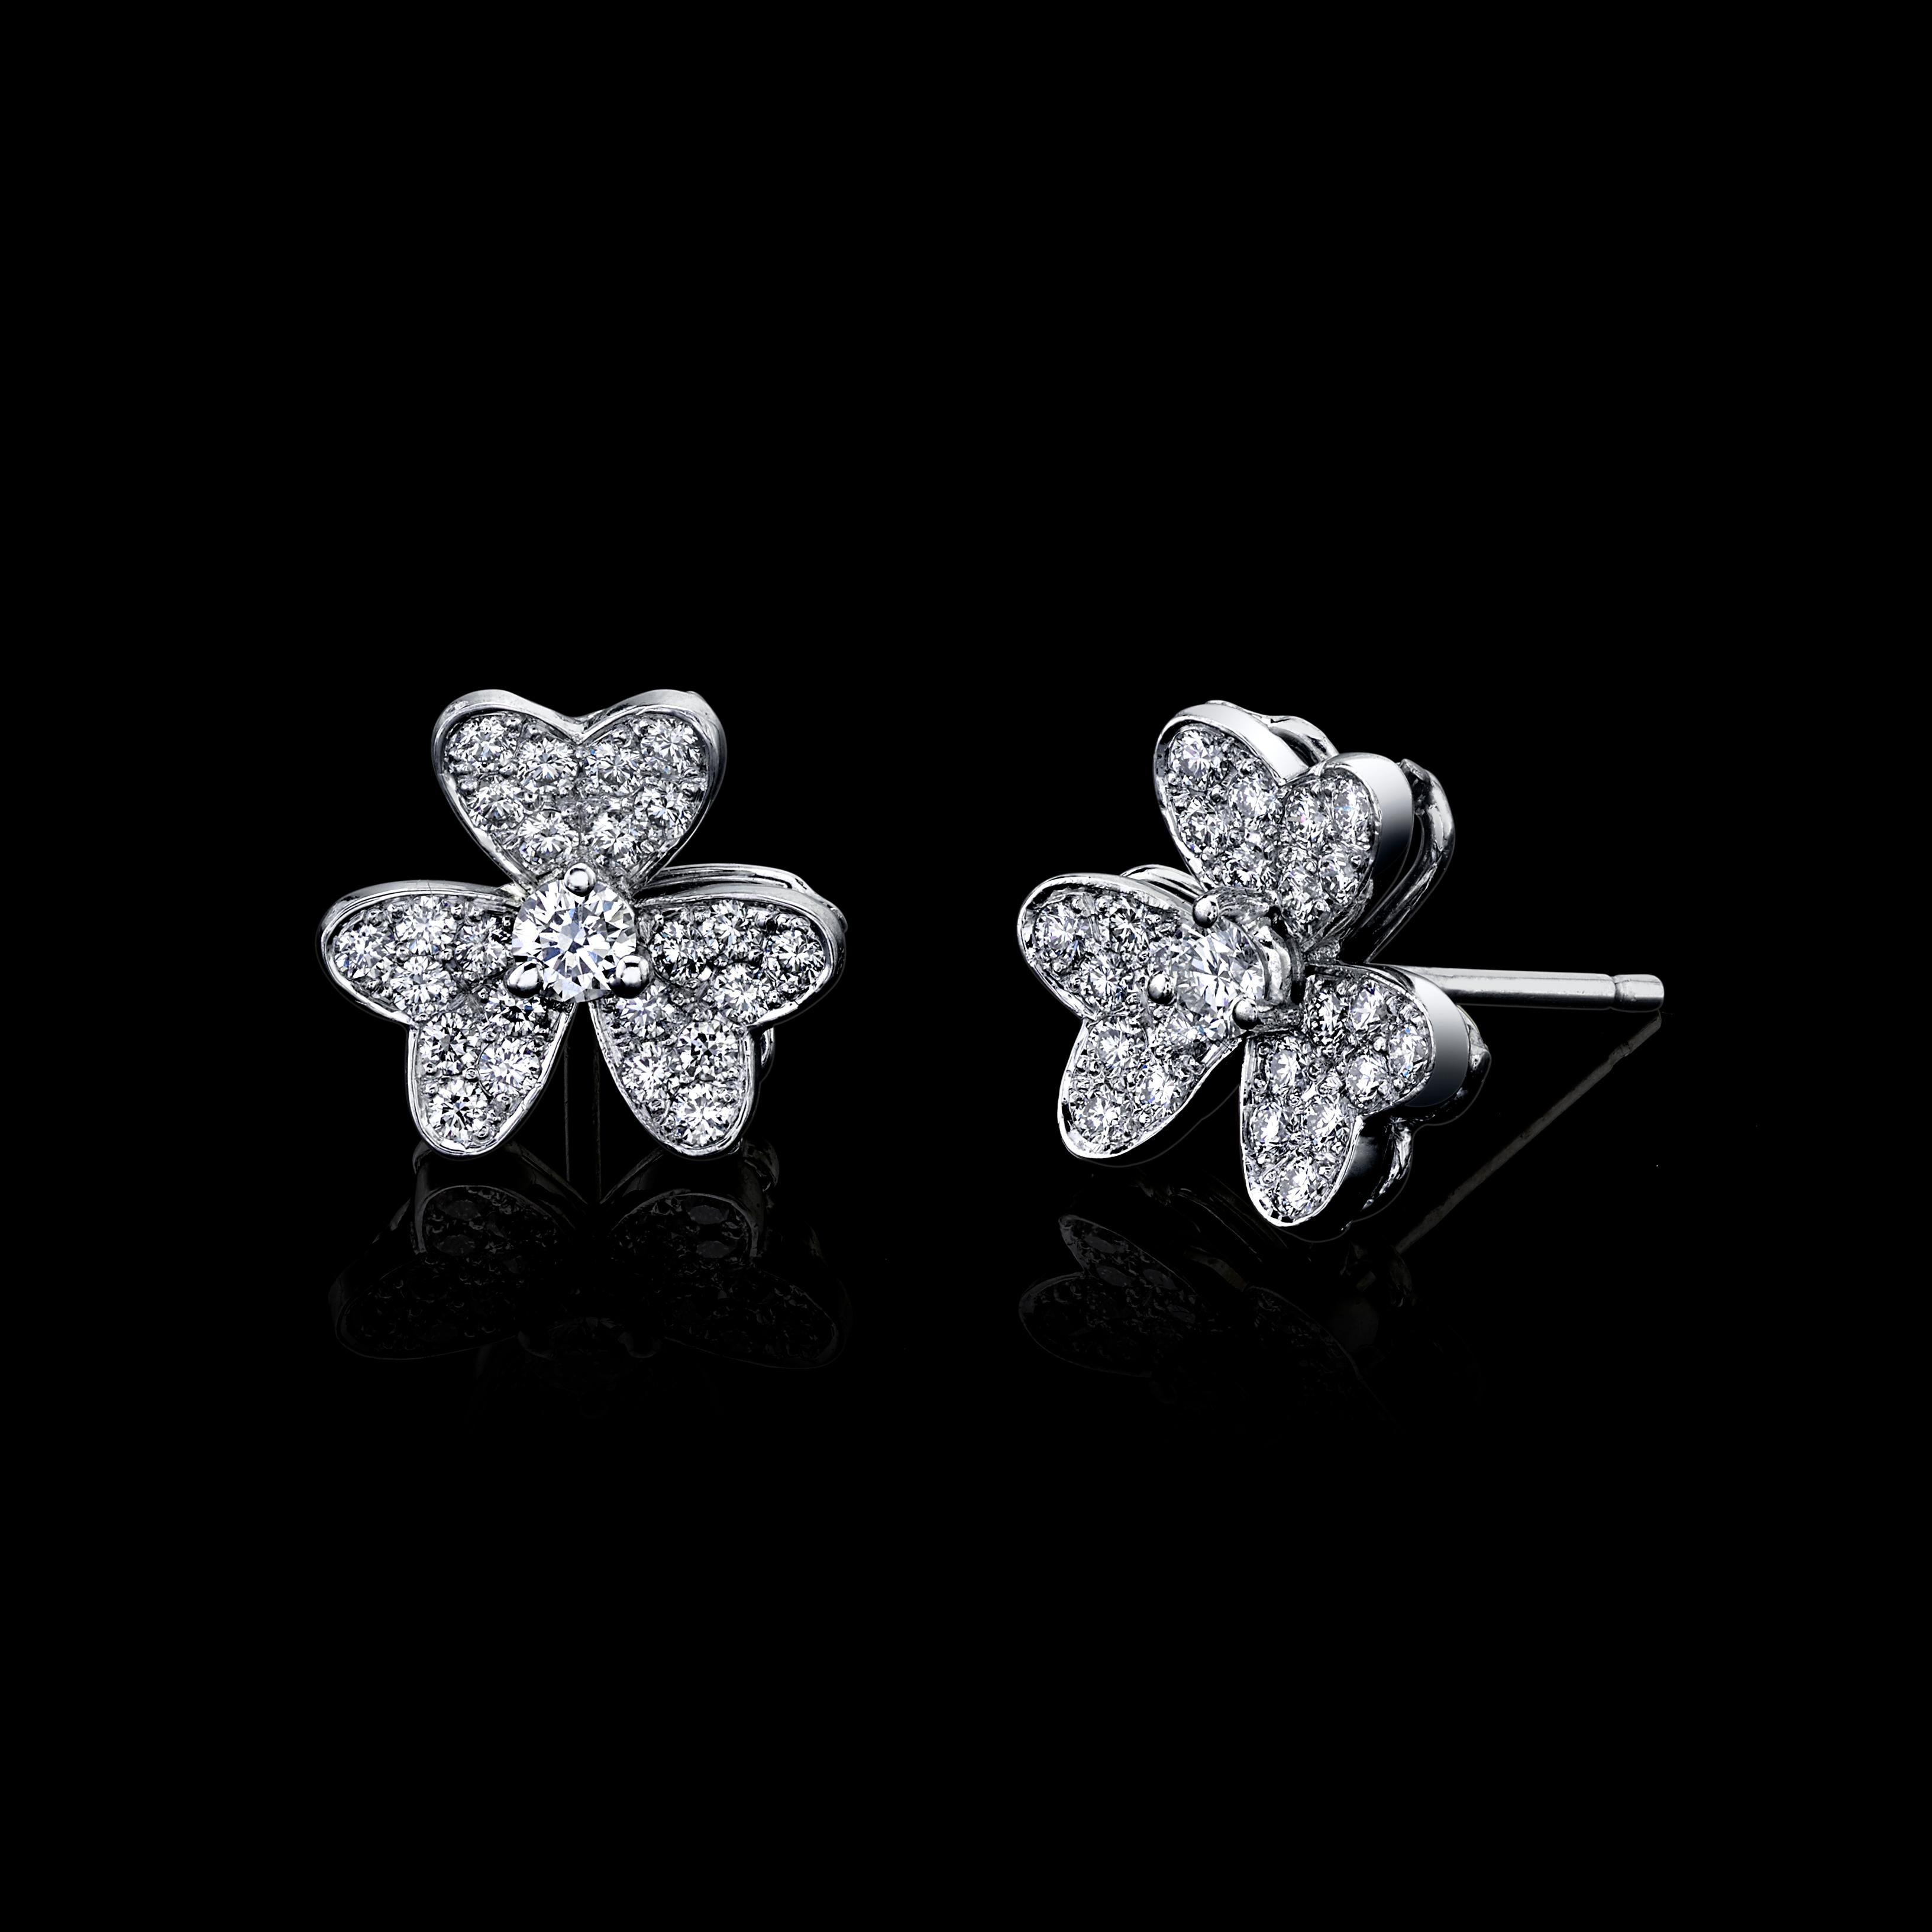 DIAMOND FLOWER EARRINGS 18K WHITE GOLD

Center Stone Total Carat Weight 0.20 carat 

D/E  Color VVS/VS Clarity

Micropave Round Brilliant Diamonds 0.60 carats

D/E Color VVS/VS Clarity

0.80 CTW of all Diamonds

Set in 18K White Gold

Shipped in a